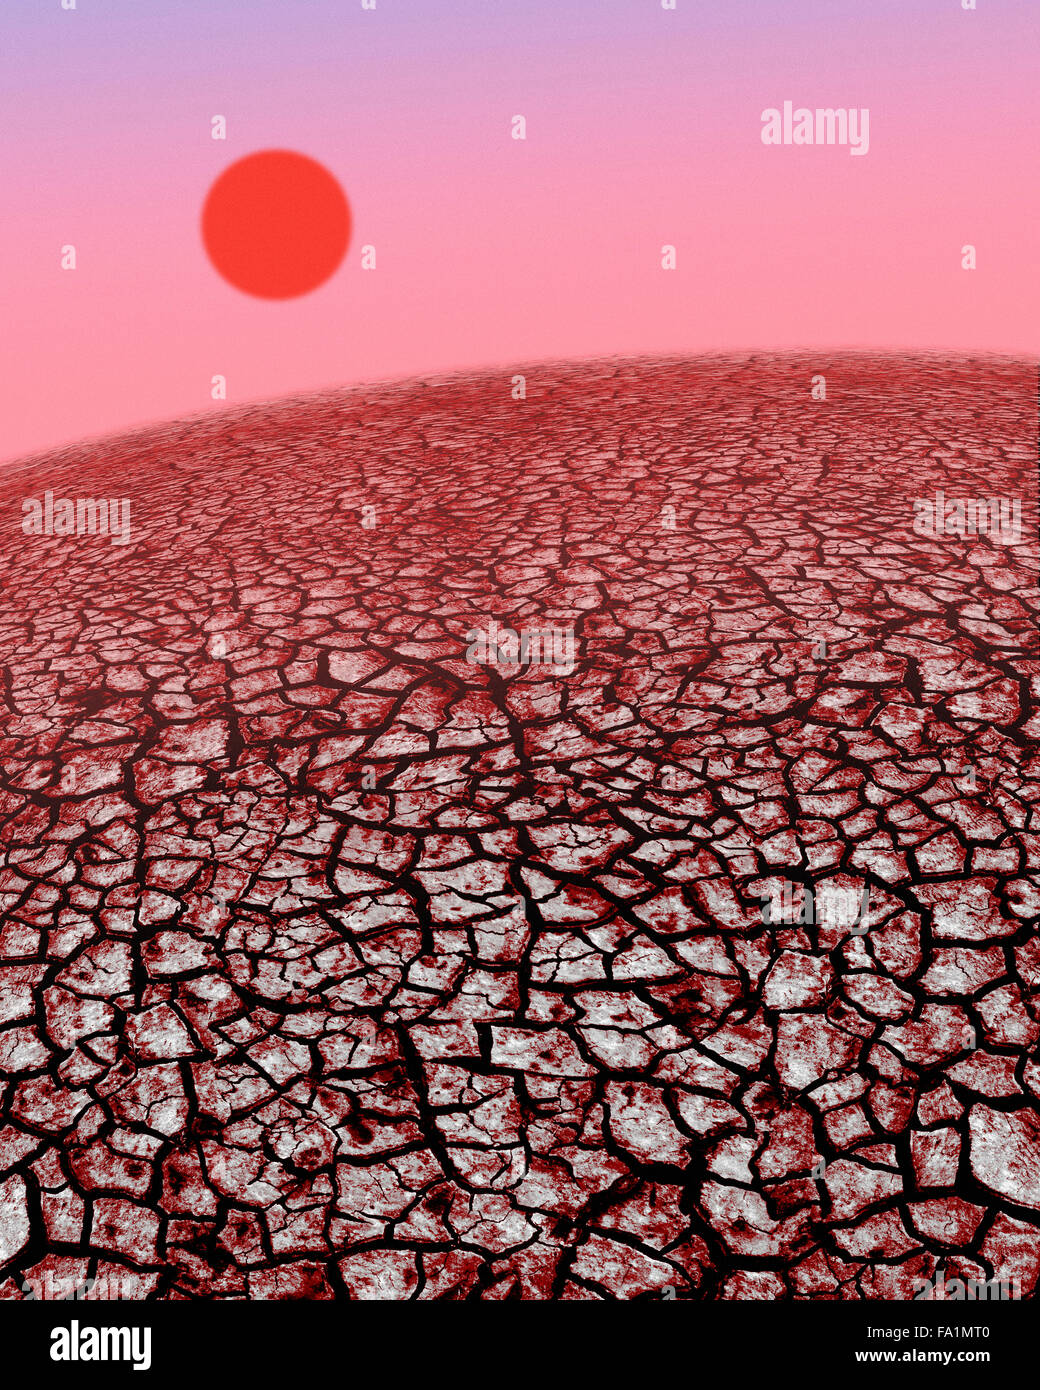 Scorched earth caused by climate change and global warming Stock Photo